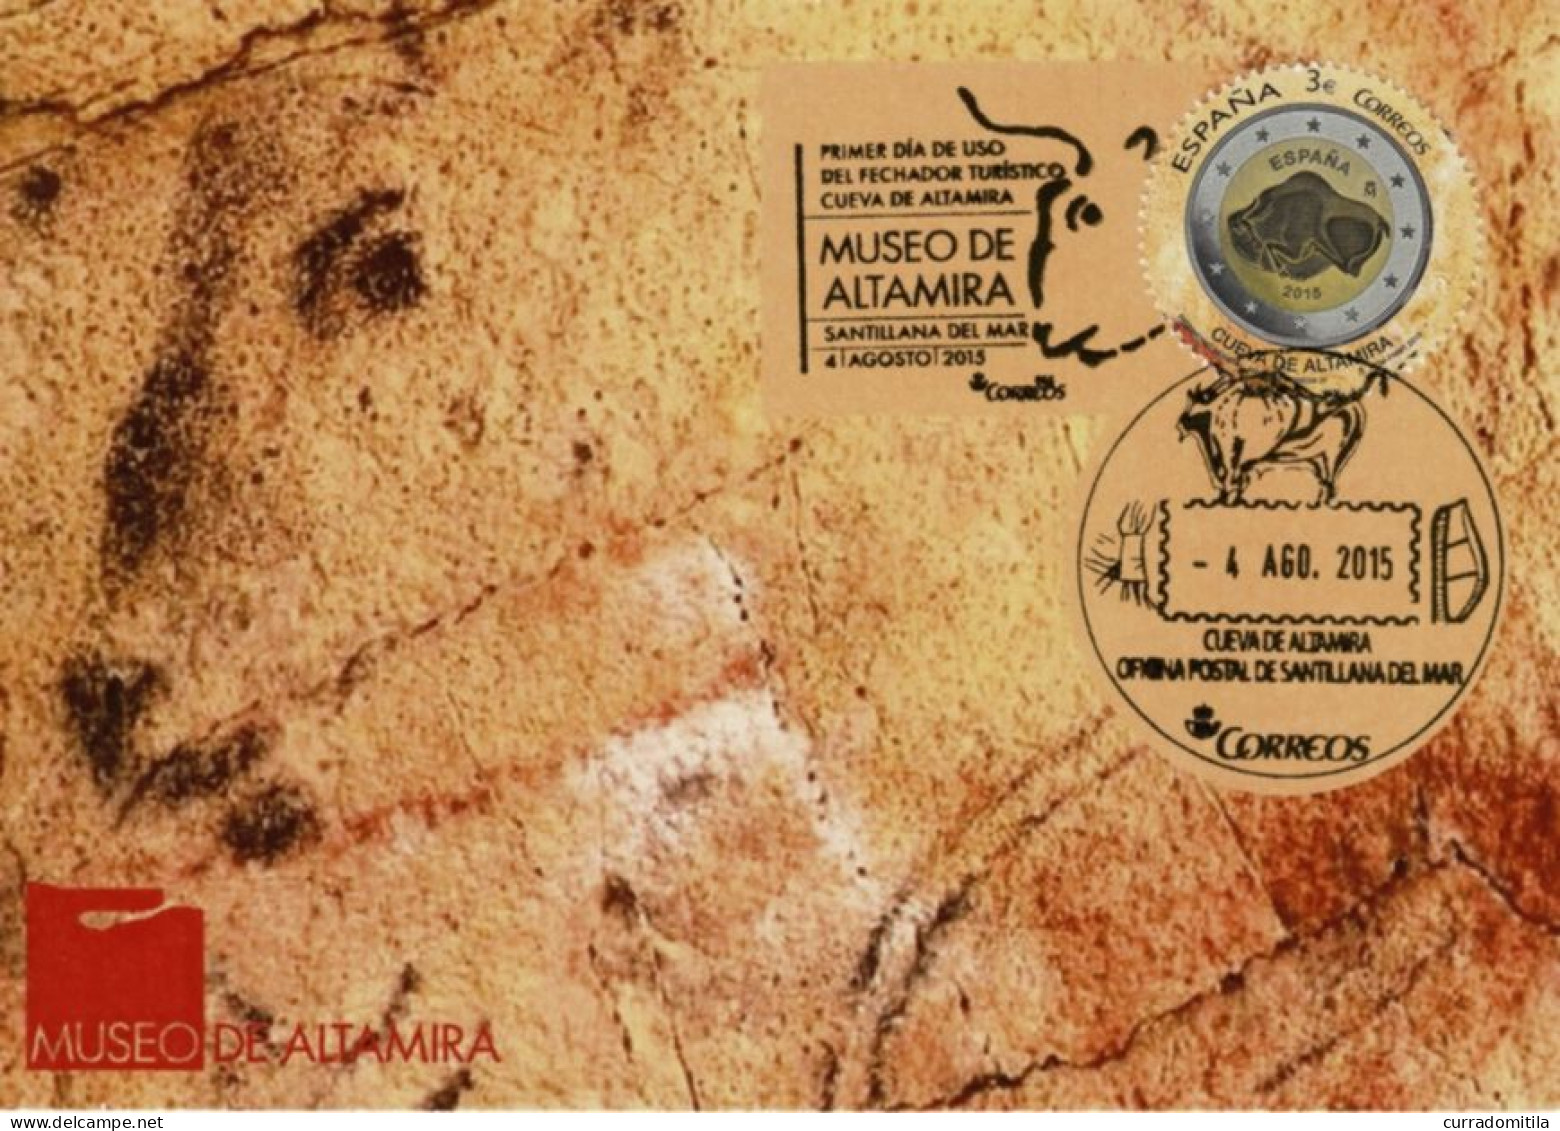 2015 Card (Large) With Rock Art Cancellations, Prehistoric Bison Of Altamita And Special Stamp Of Altamira - Archäologie